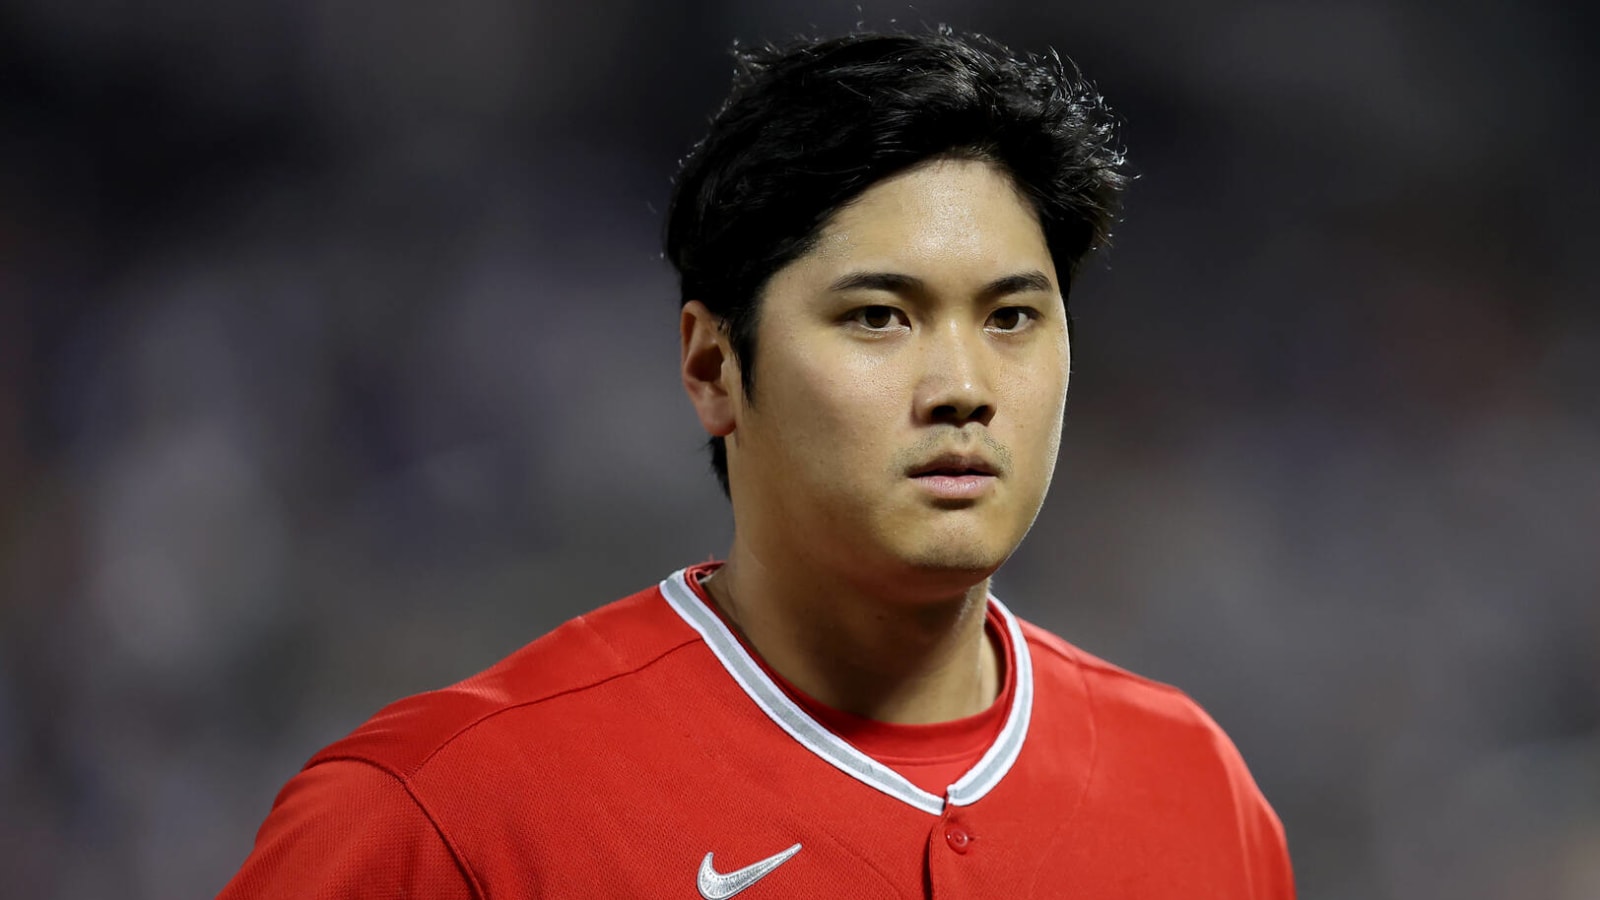 Shohei Ohtani's career with Angels could be over